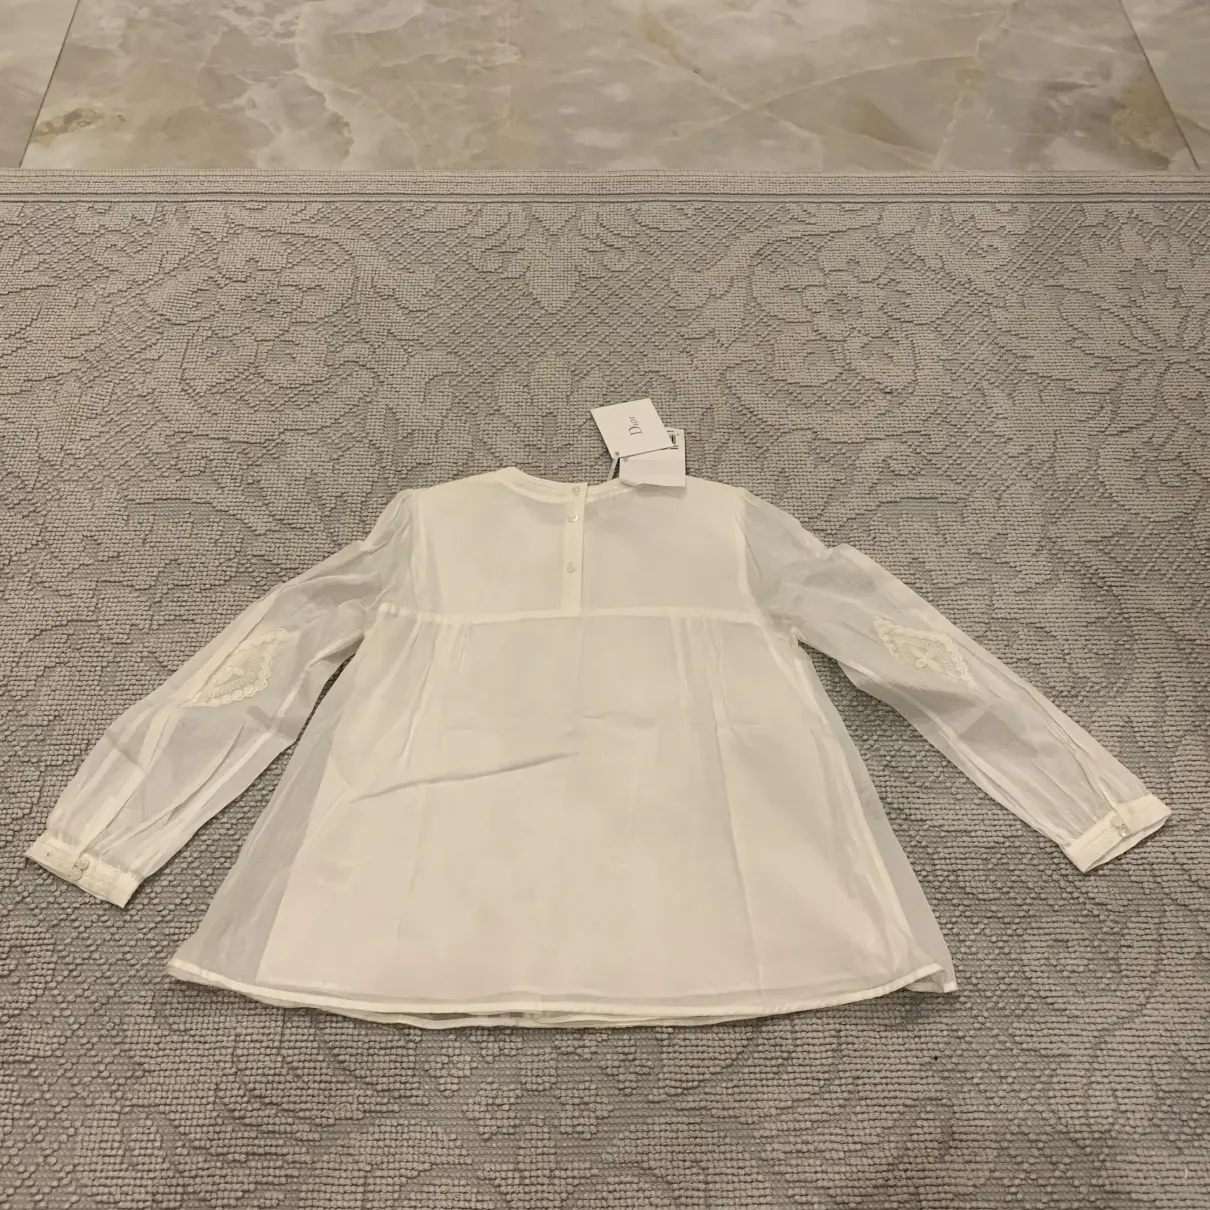 Dior Shirt for sale